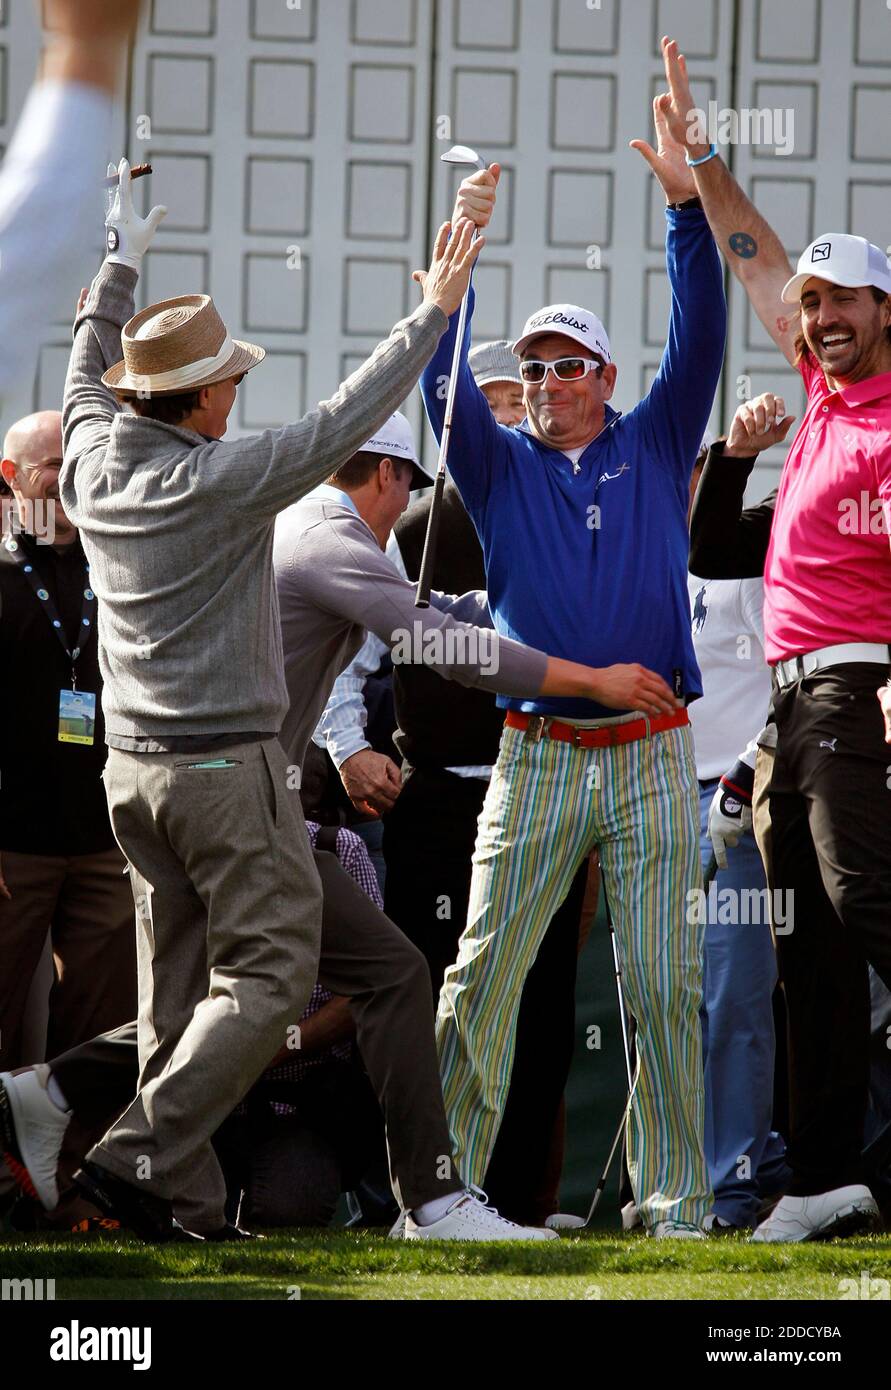 NO FILM, NO VIDEO, NO TV, NO DOCUMENTARY - At center, musician Huey Lewis is congratulated by Jake Owen, right, Andy Garcia, left, and Josh Duhamel, center left, after winning the chip-off during the $100,000 celebrity charity shoot-out golf match at the AT&T Pebble Beach National Pro-Am in Pebble Beach, CA, USA on February 6, 2013. Photo by LiPo Ching/San Jose Mercury News/MCT/ABACAPRESS.COM Stock Photo